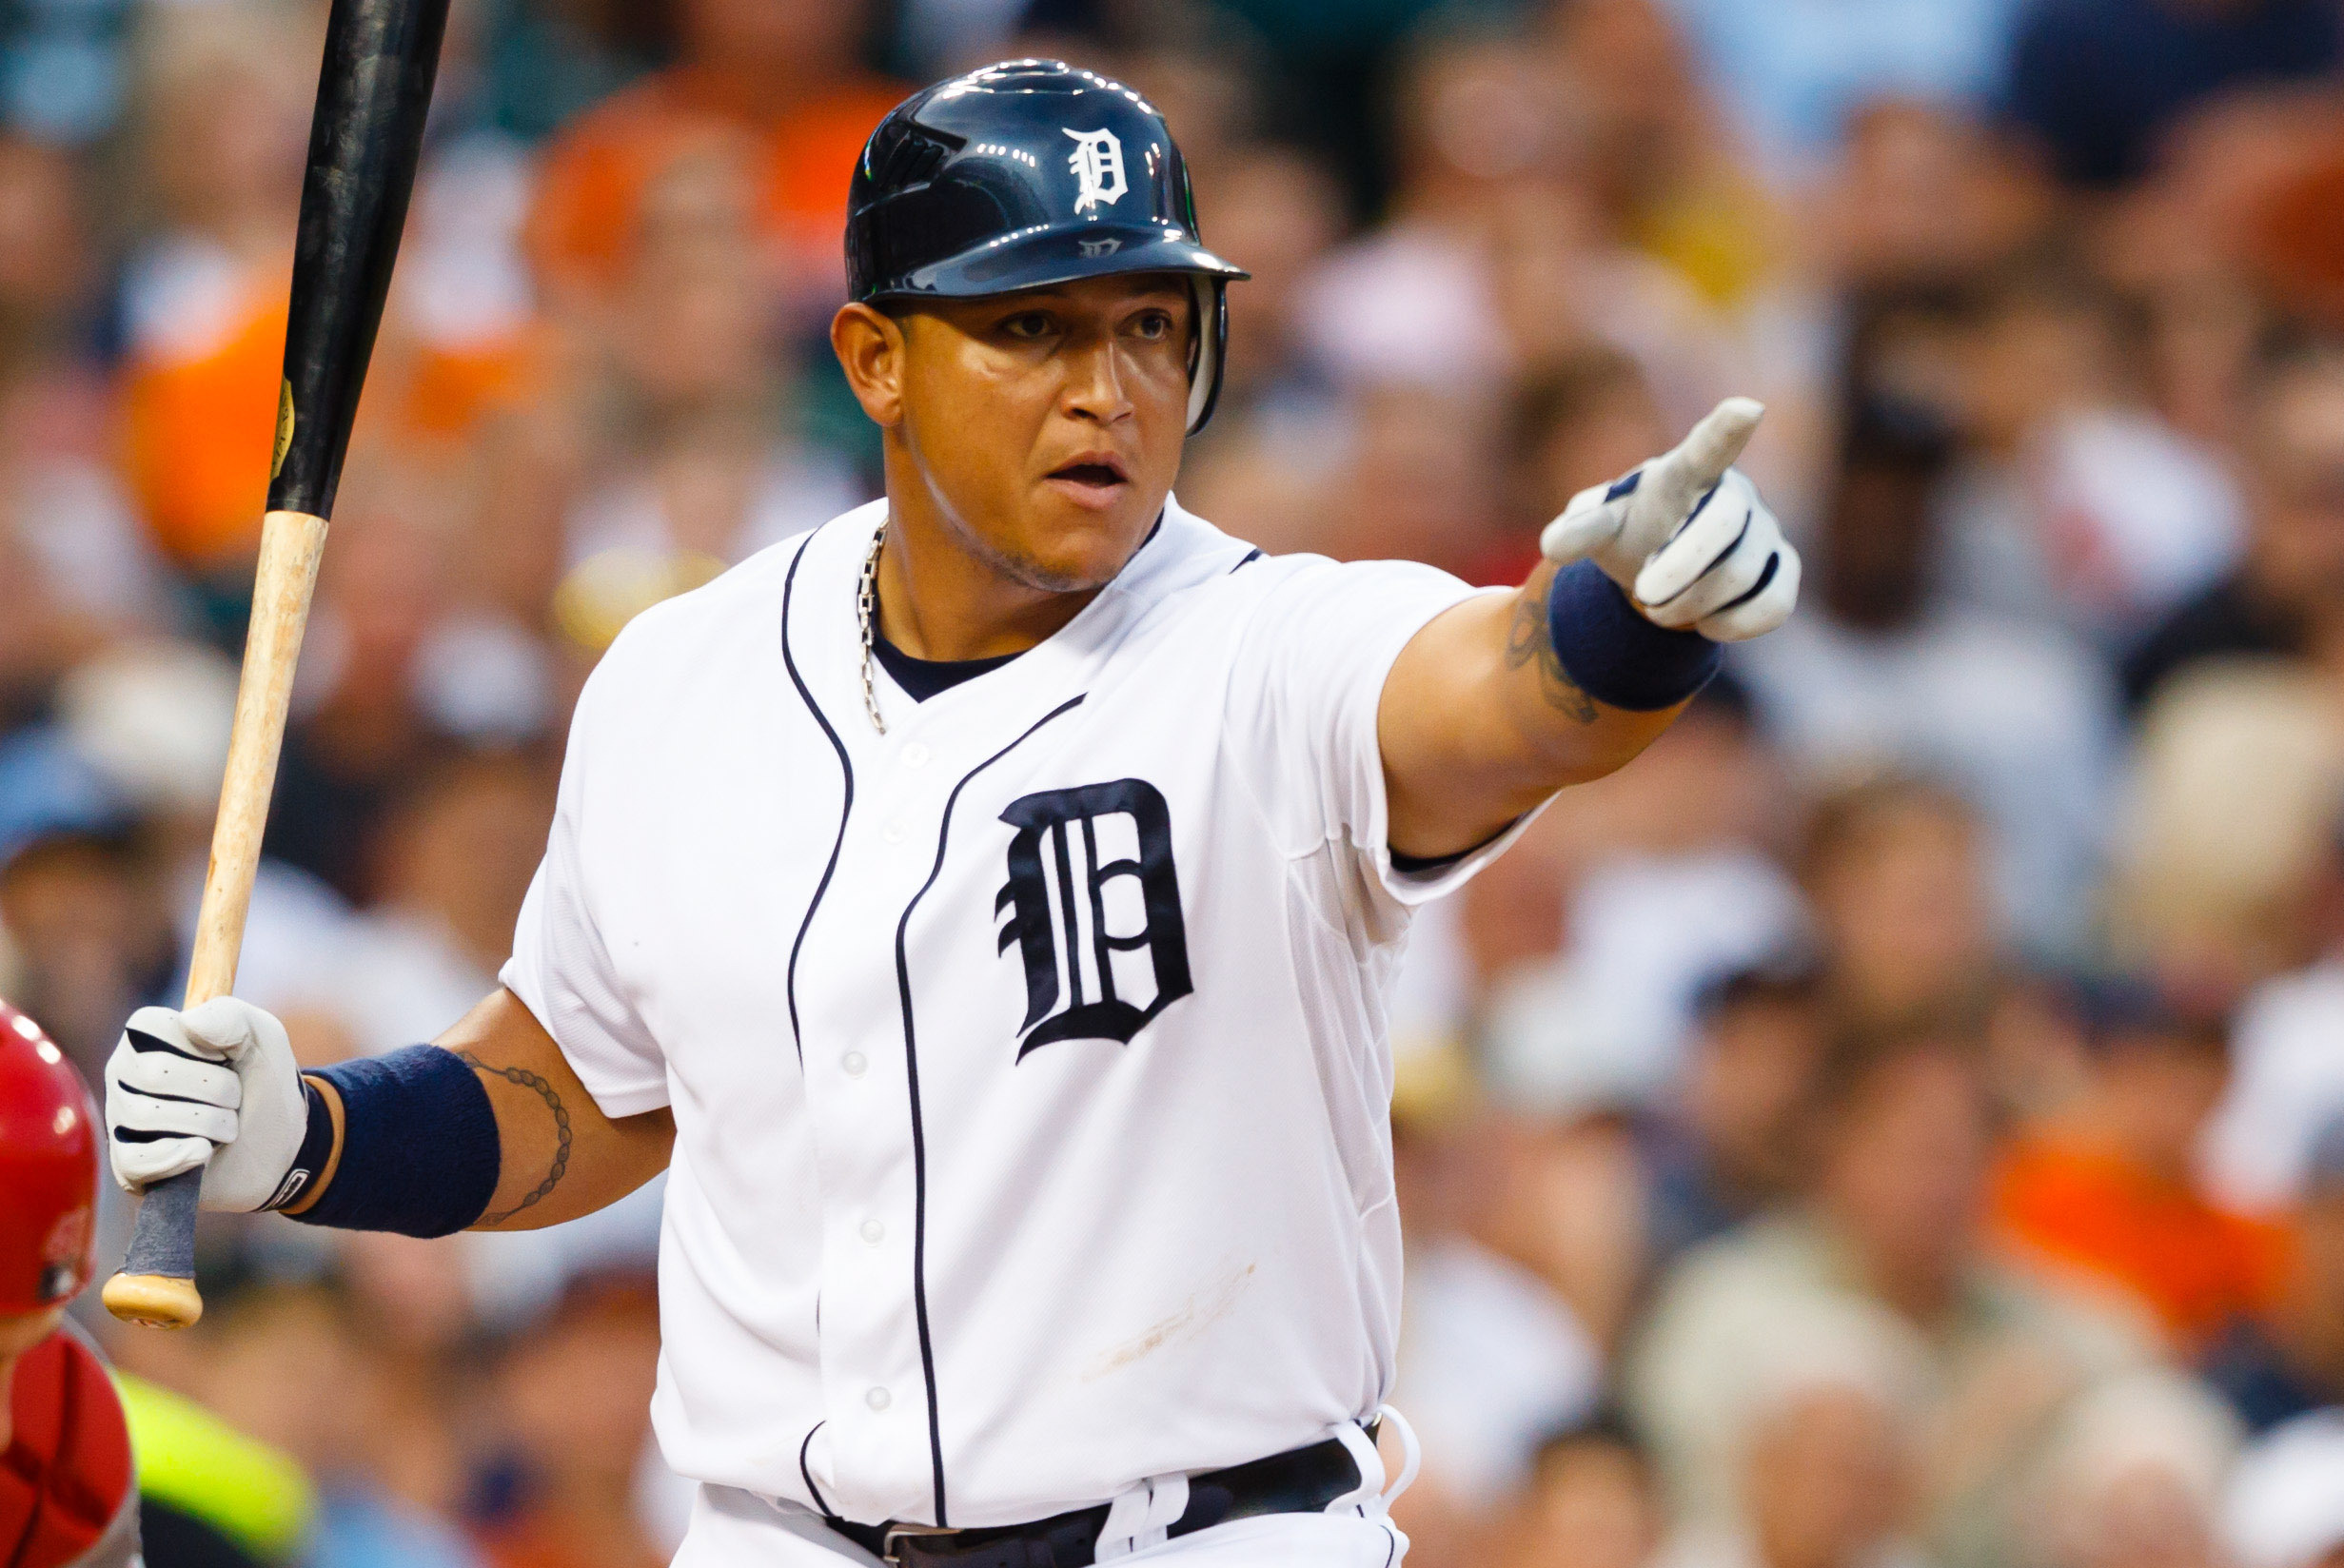 White Sox honor Miguel Cabrera, who reminds them how much he has